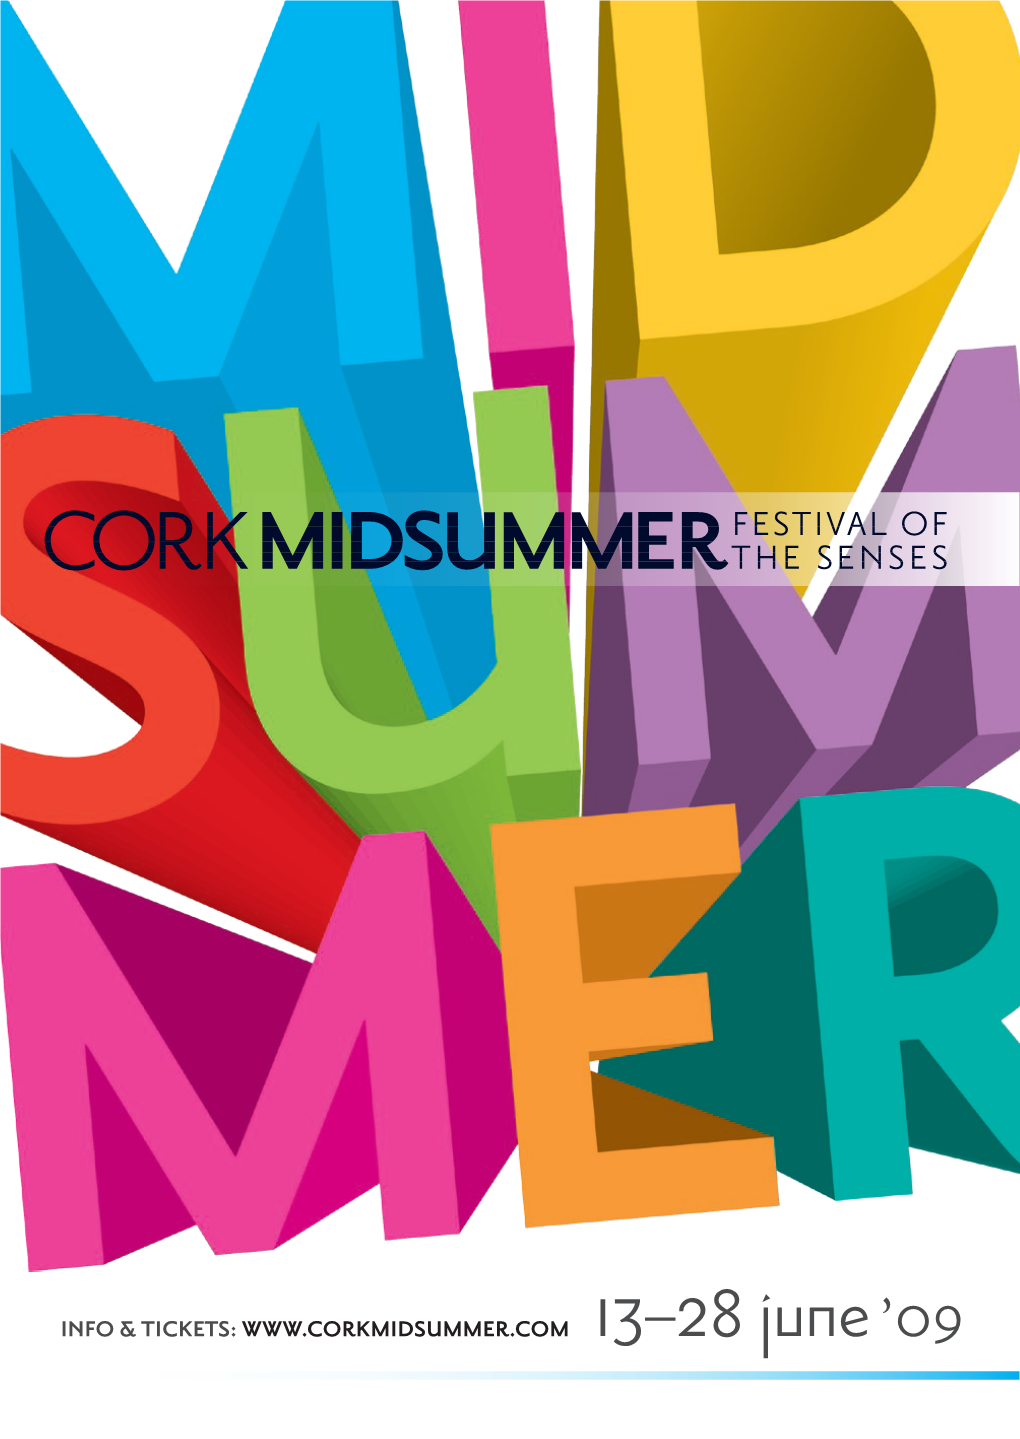 2009 Funders 2 Hello and Welcome to the Cork Midsummer Festival 2009